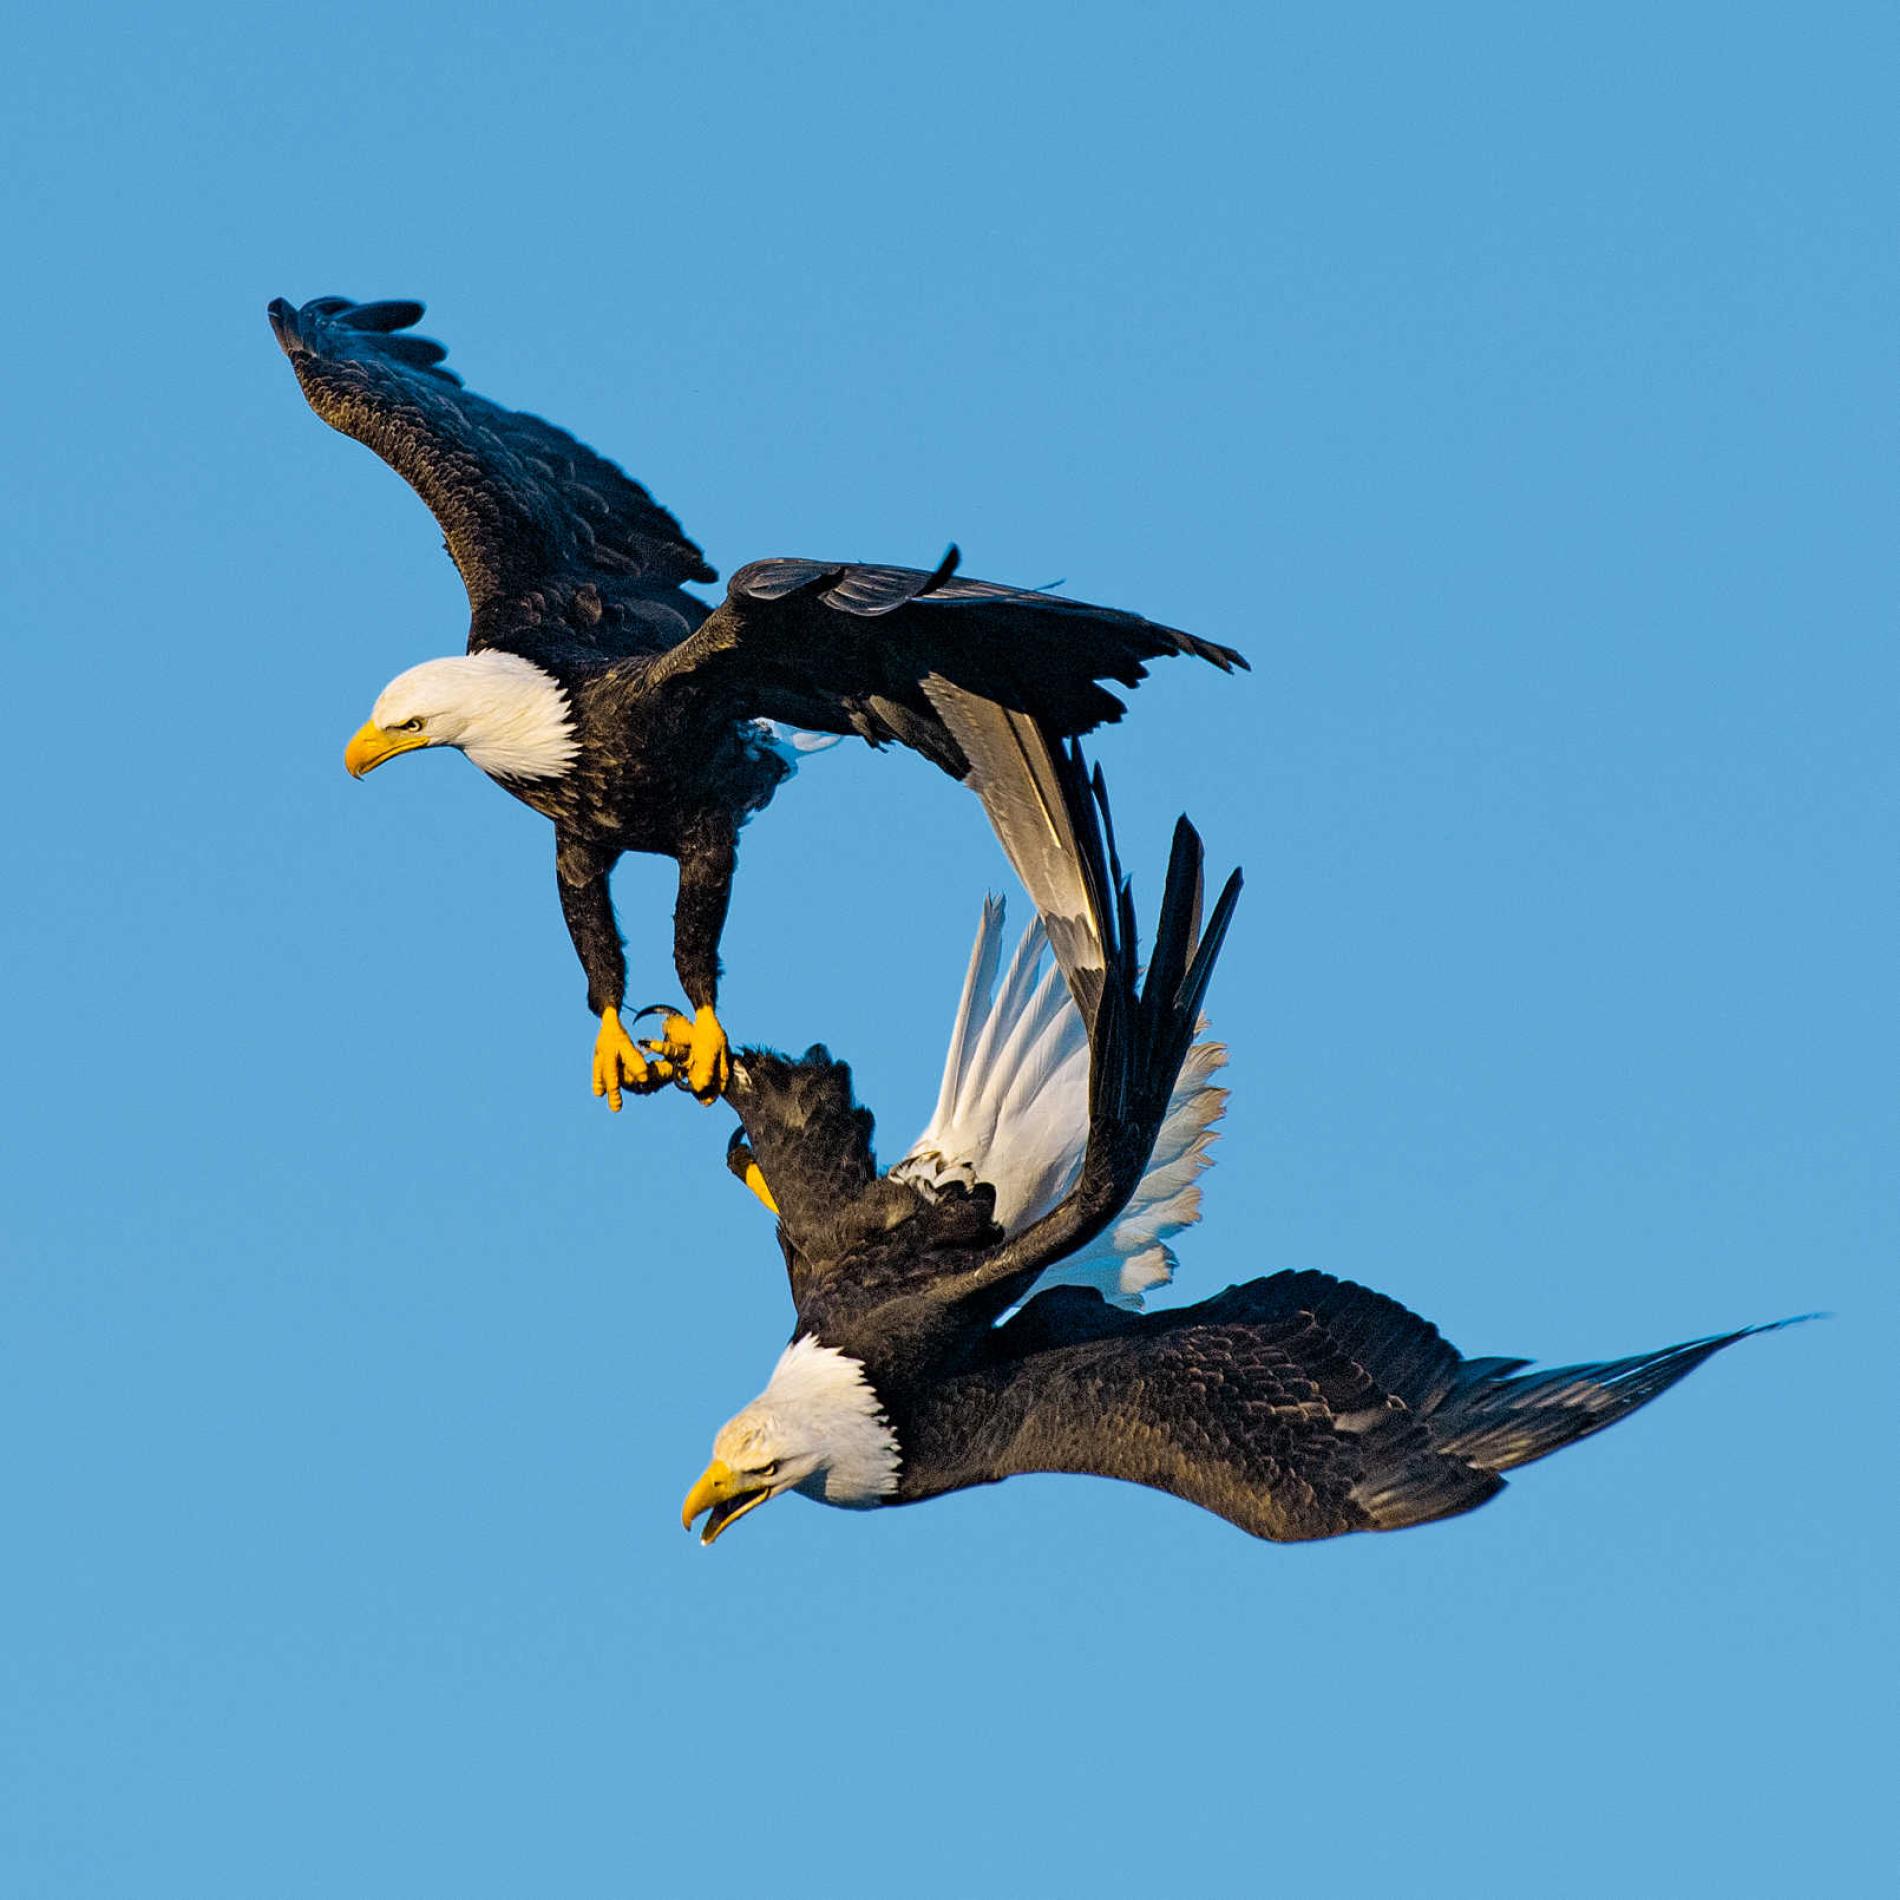 For Amorous Bald Eagles, a 'Death Spiral' Is a Hot Time